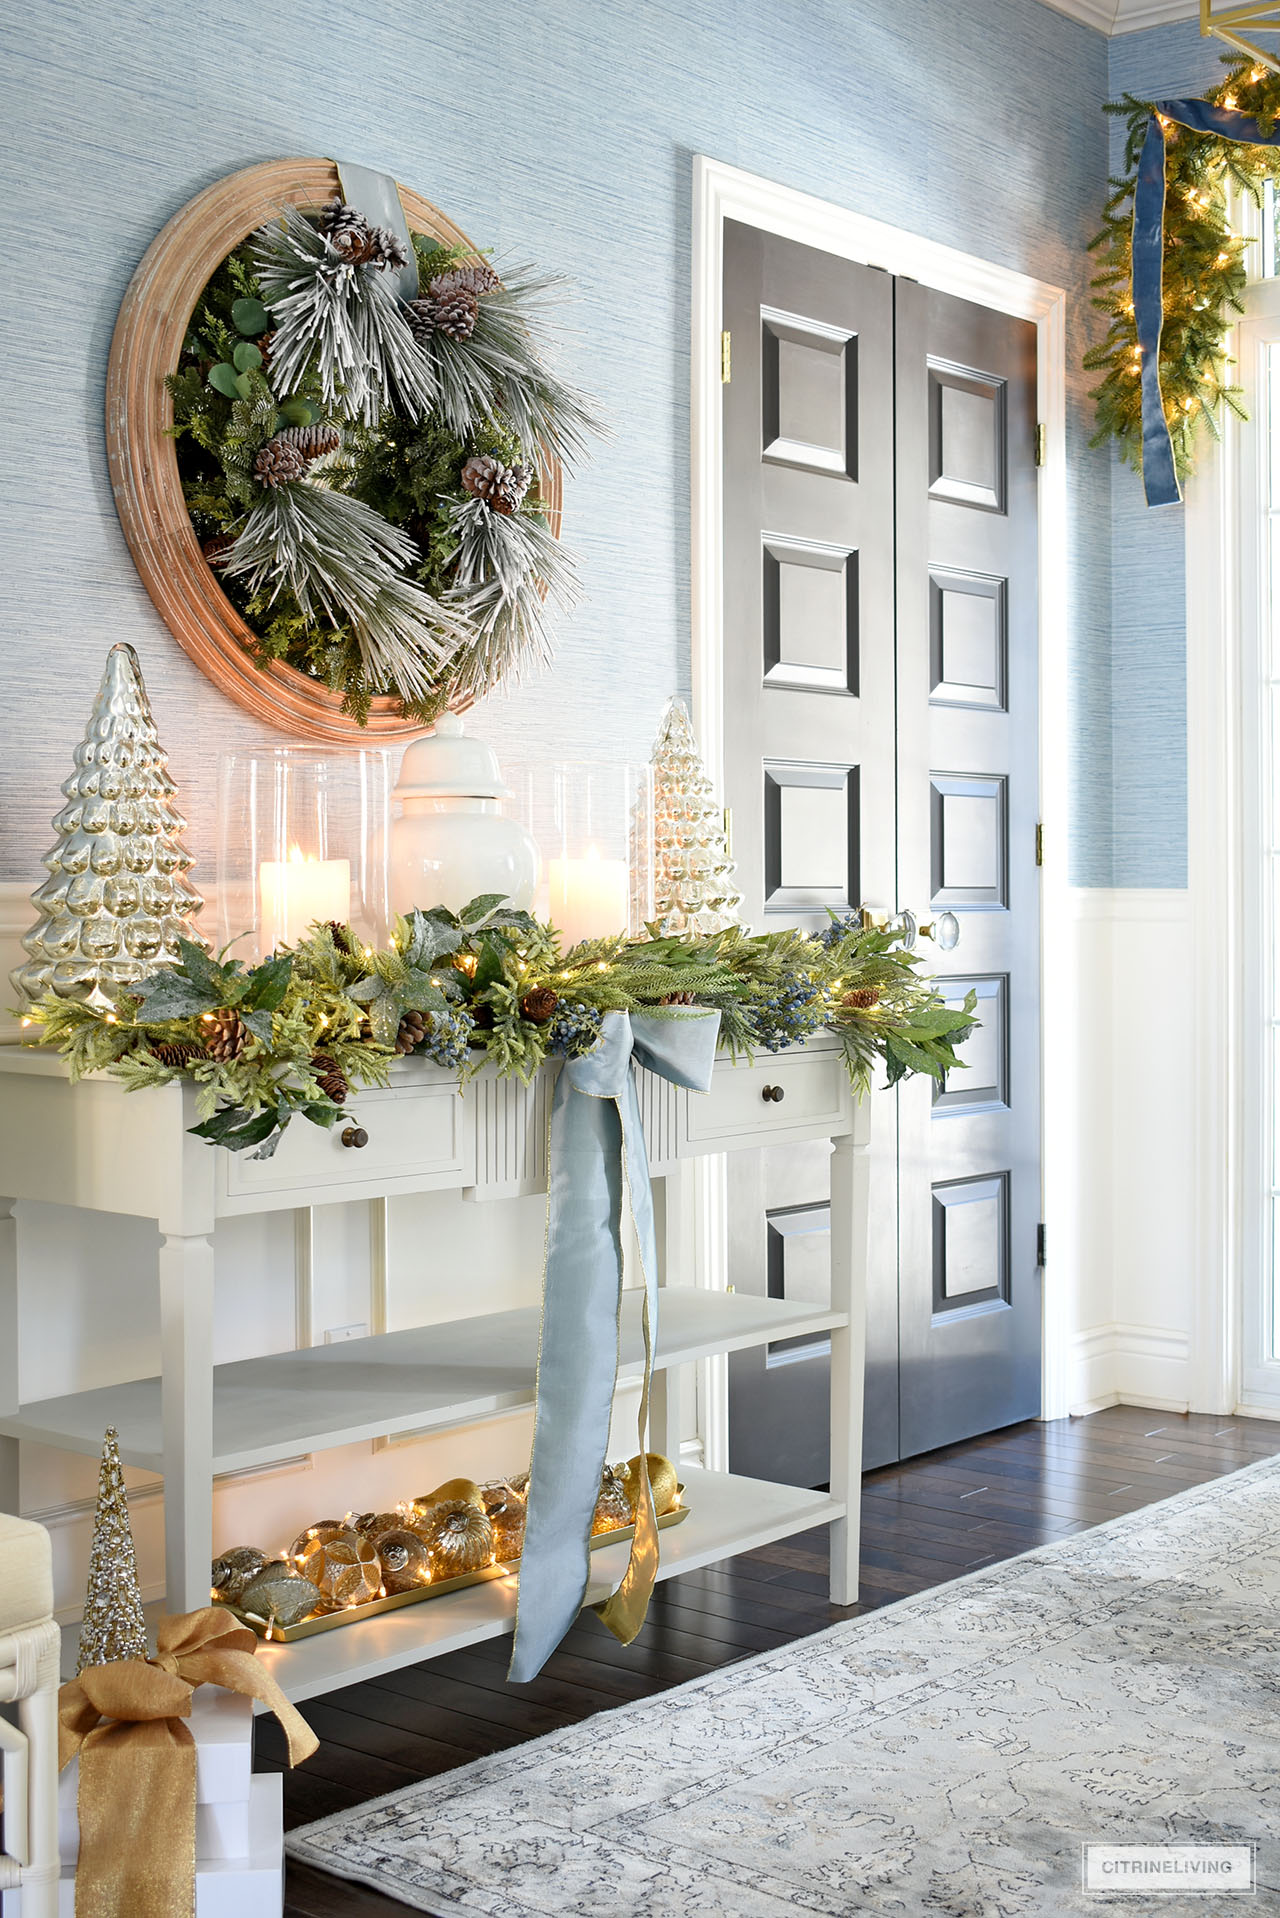 Entryway decorated for Christmas with greenery and blue, gold and silver accents.